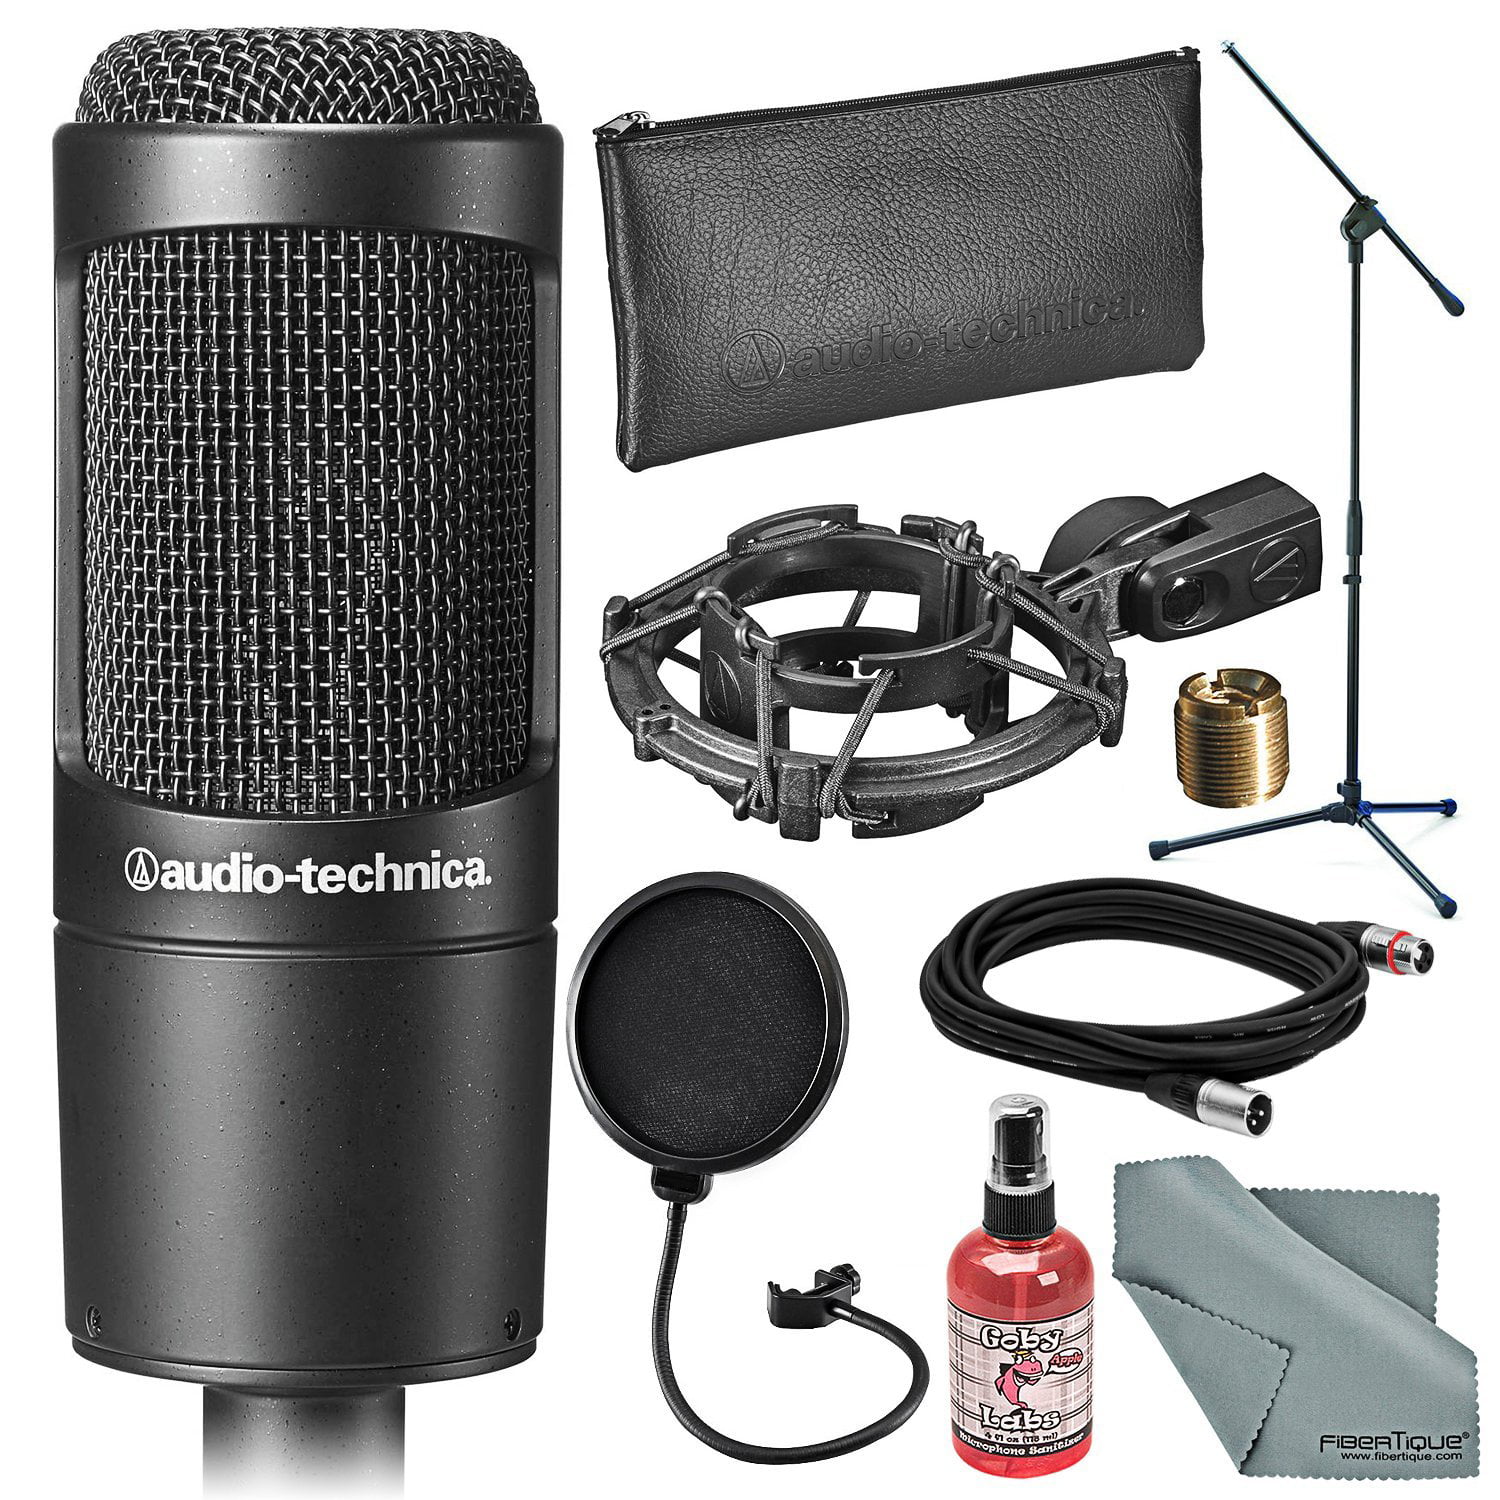 Audio-Technica AT2035 Cardioid Condenser Microphone Bundle with Boom Stand Pop Filter XLR Cable and Austin Bazaar Polishing Cloth 